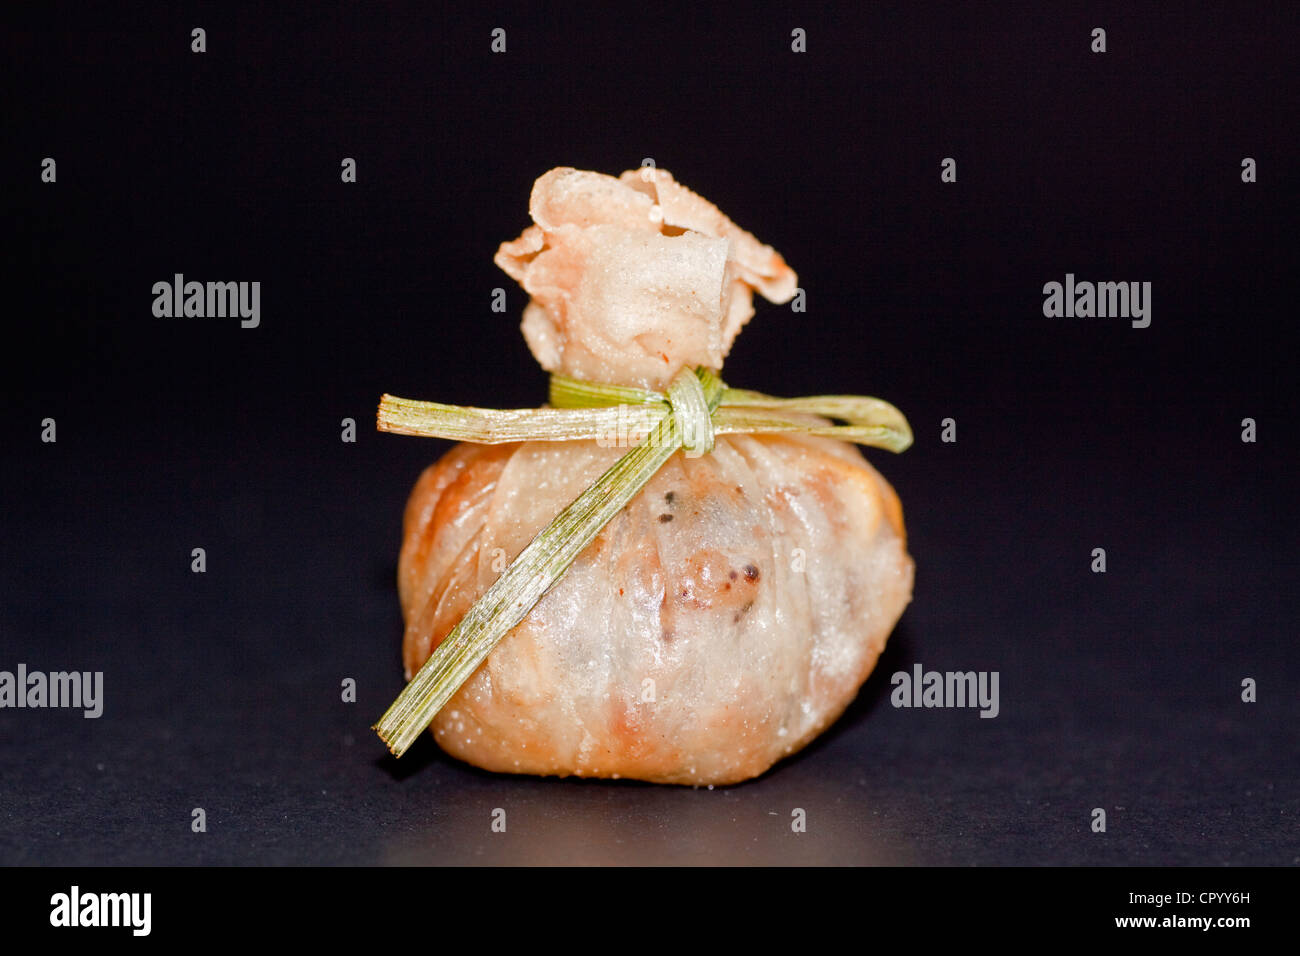 Thai Money Bag starter, pastry filled with minced meat, rice and vegetables Stock Photo